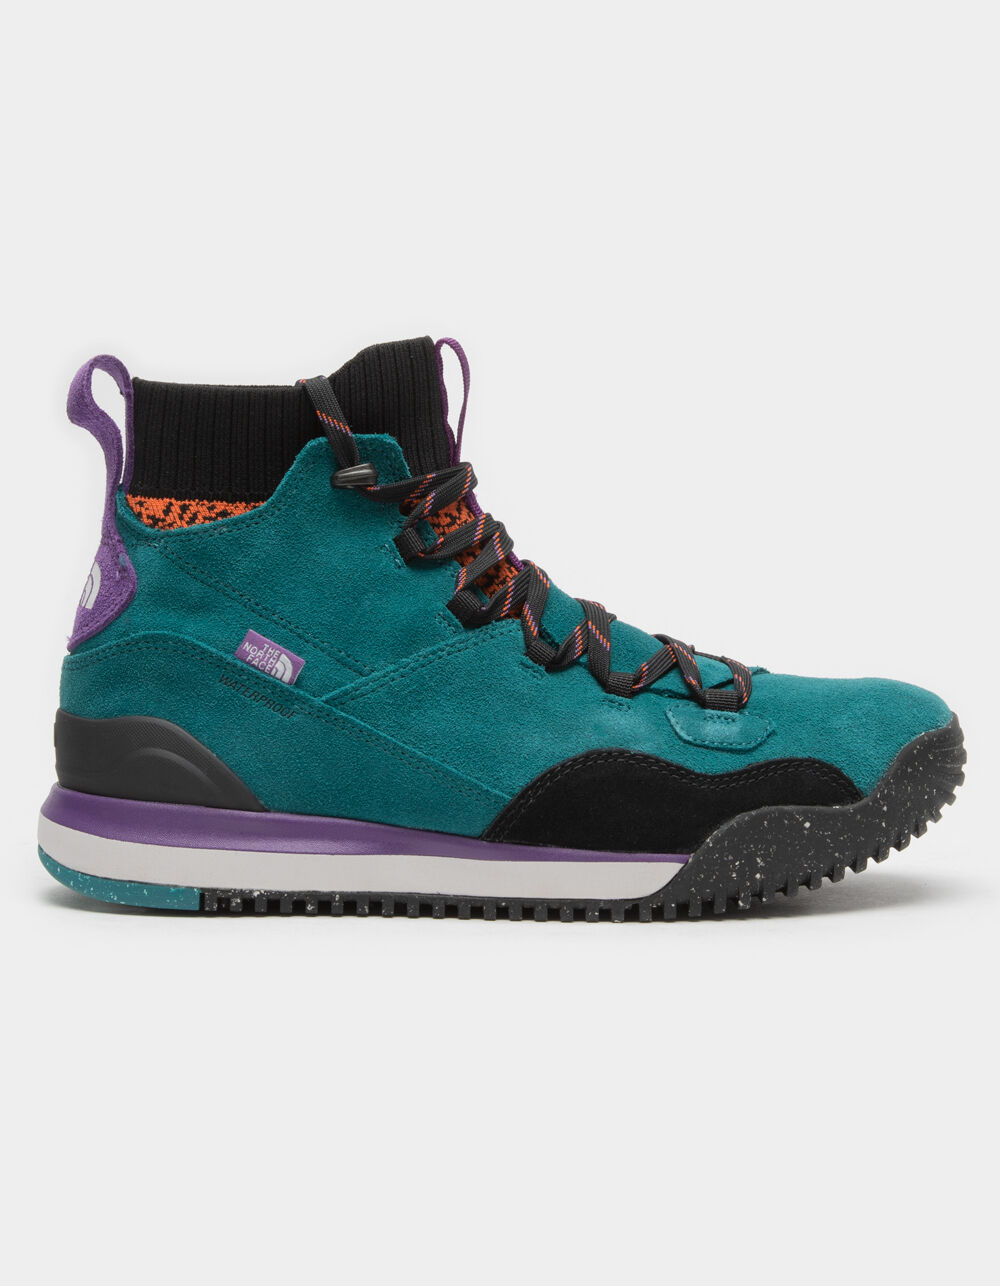 THE NORTH FACE Back To Berkeley III Sport Mens Waterproof Boots - TEAL ...